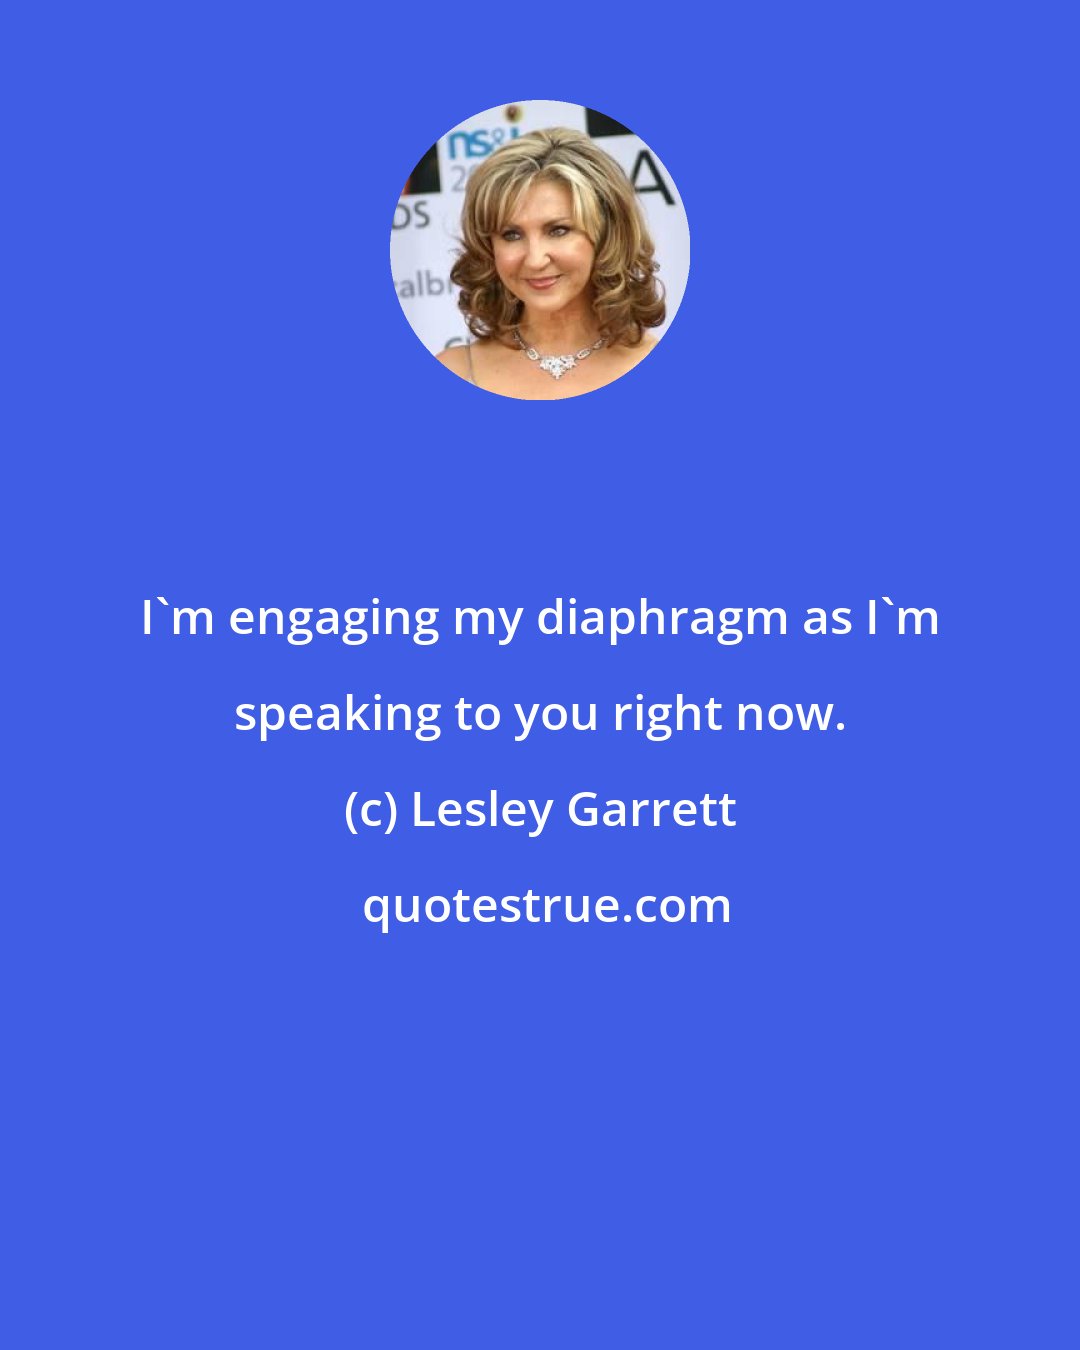 Lesley Garrett: I'm engaging my diaphragm as I'm speaking to you right now.